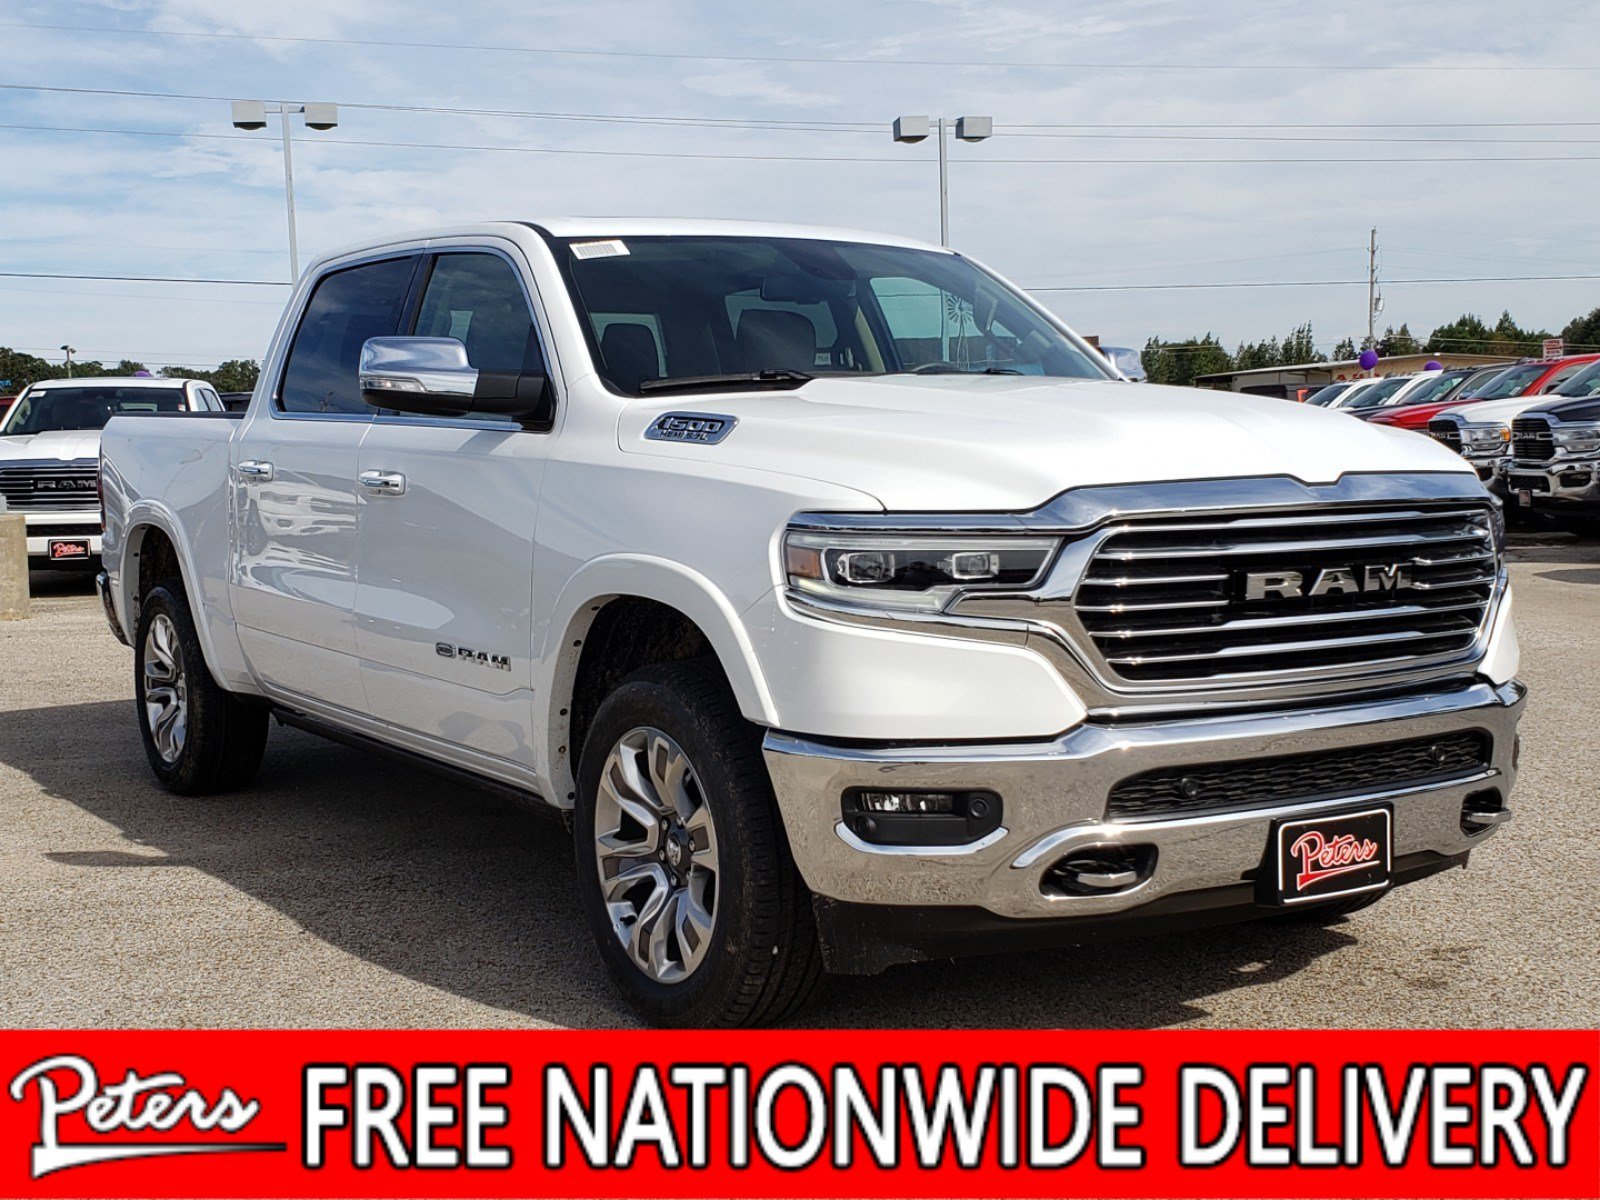 New 2020 Ram 1500 Longhorn With 4wd